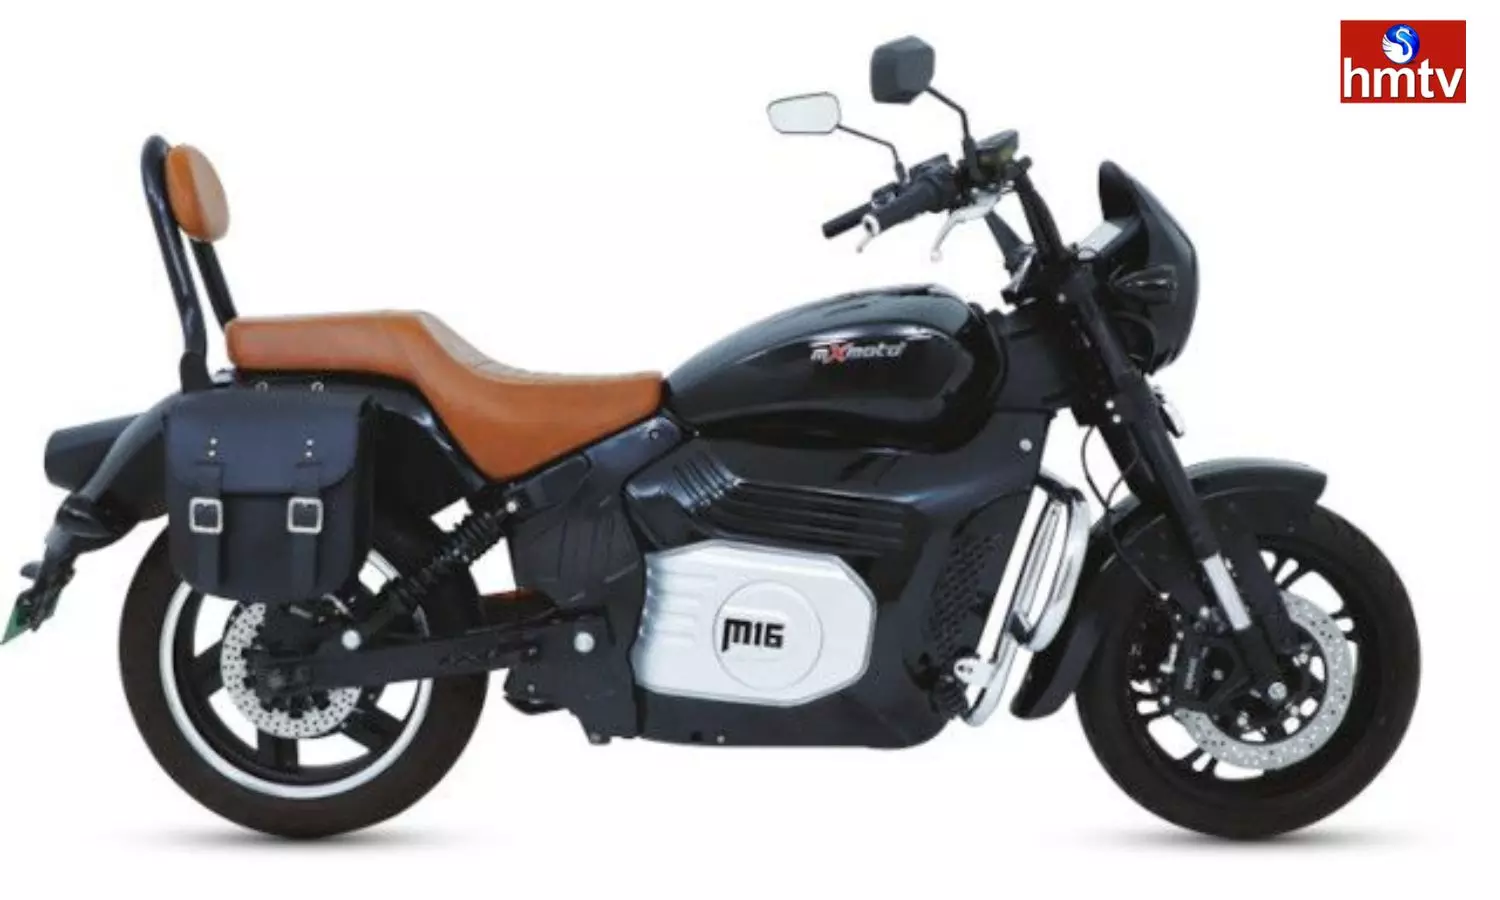 Mxmoto m16 Electric Cruiser Motorcycle Launched with 220 kms Range Check Price and Features